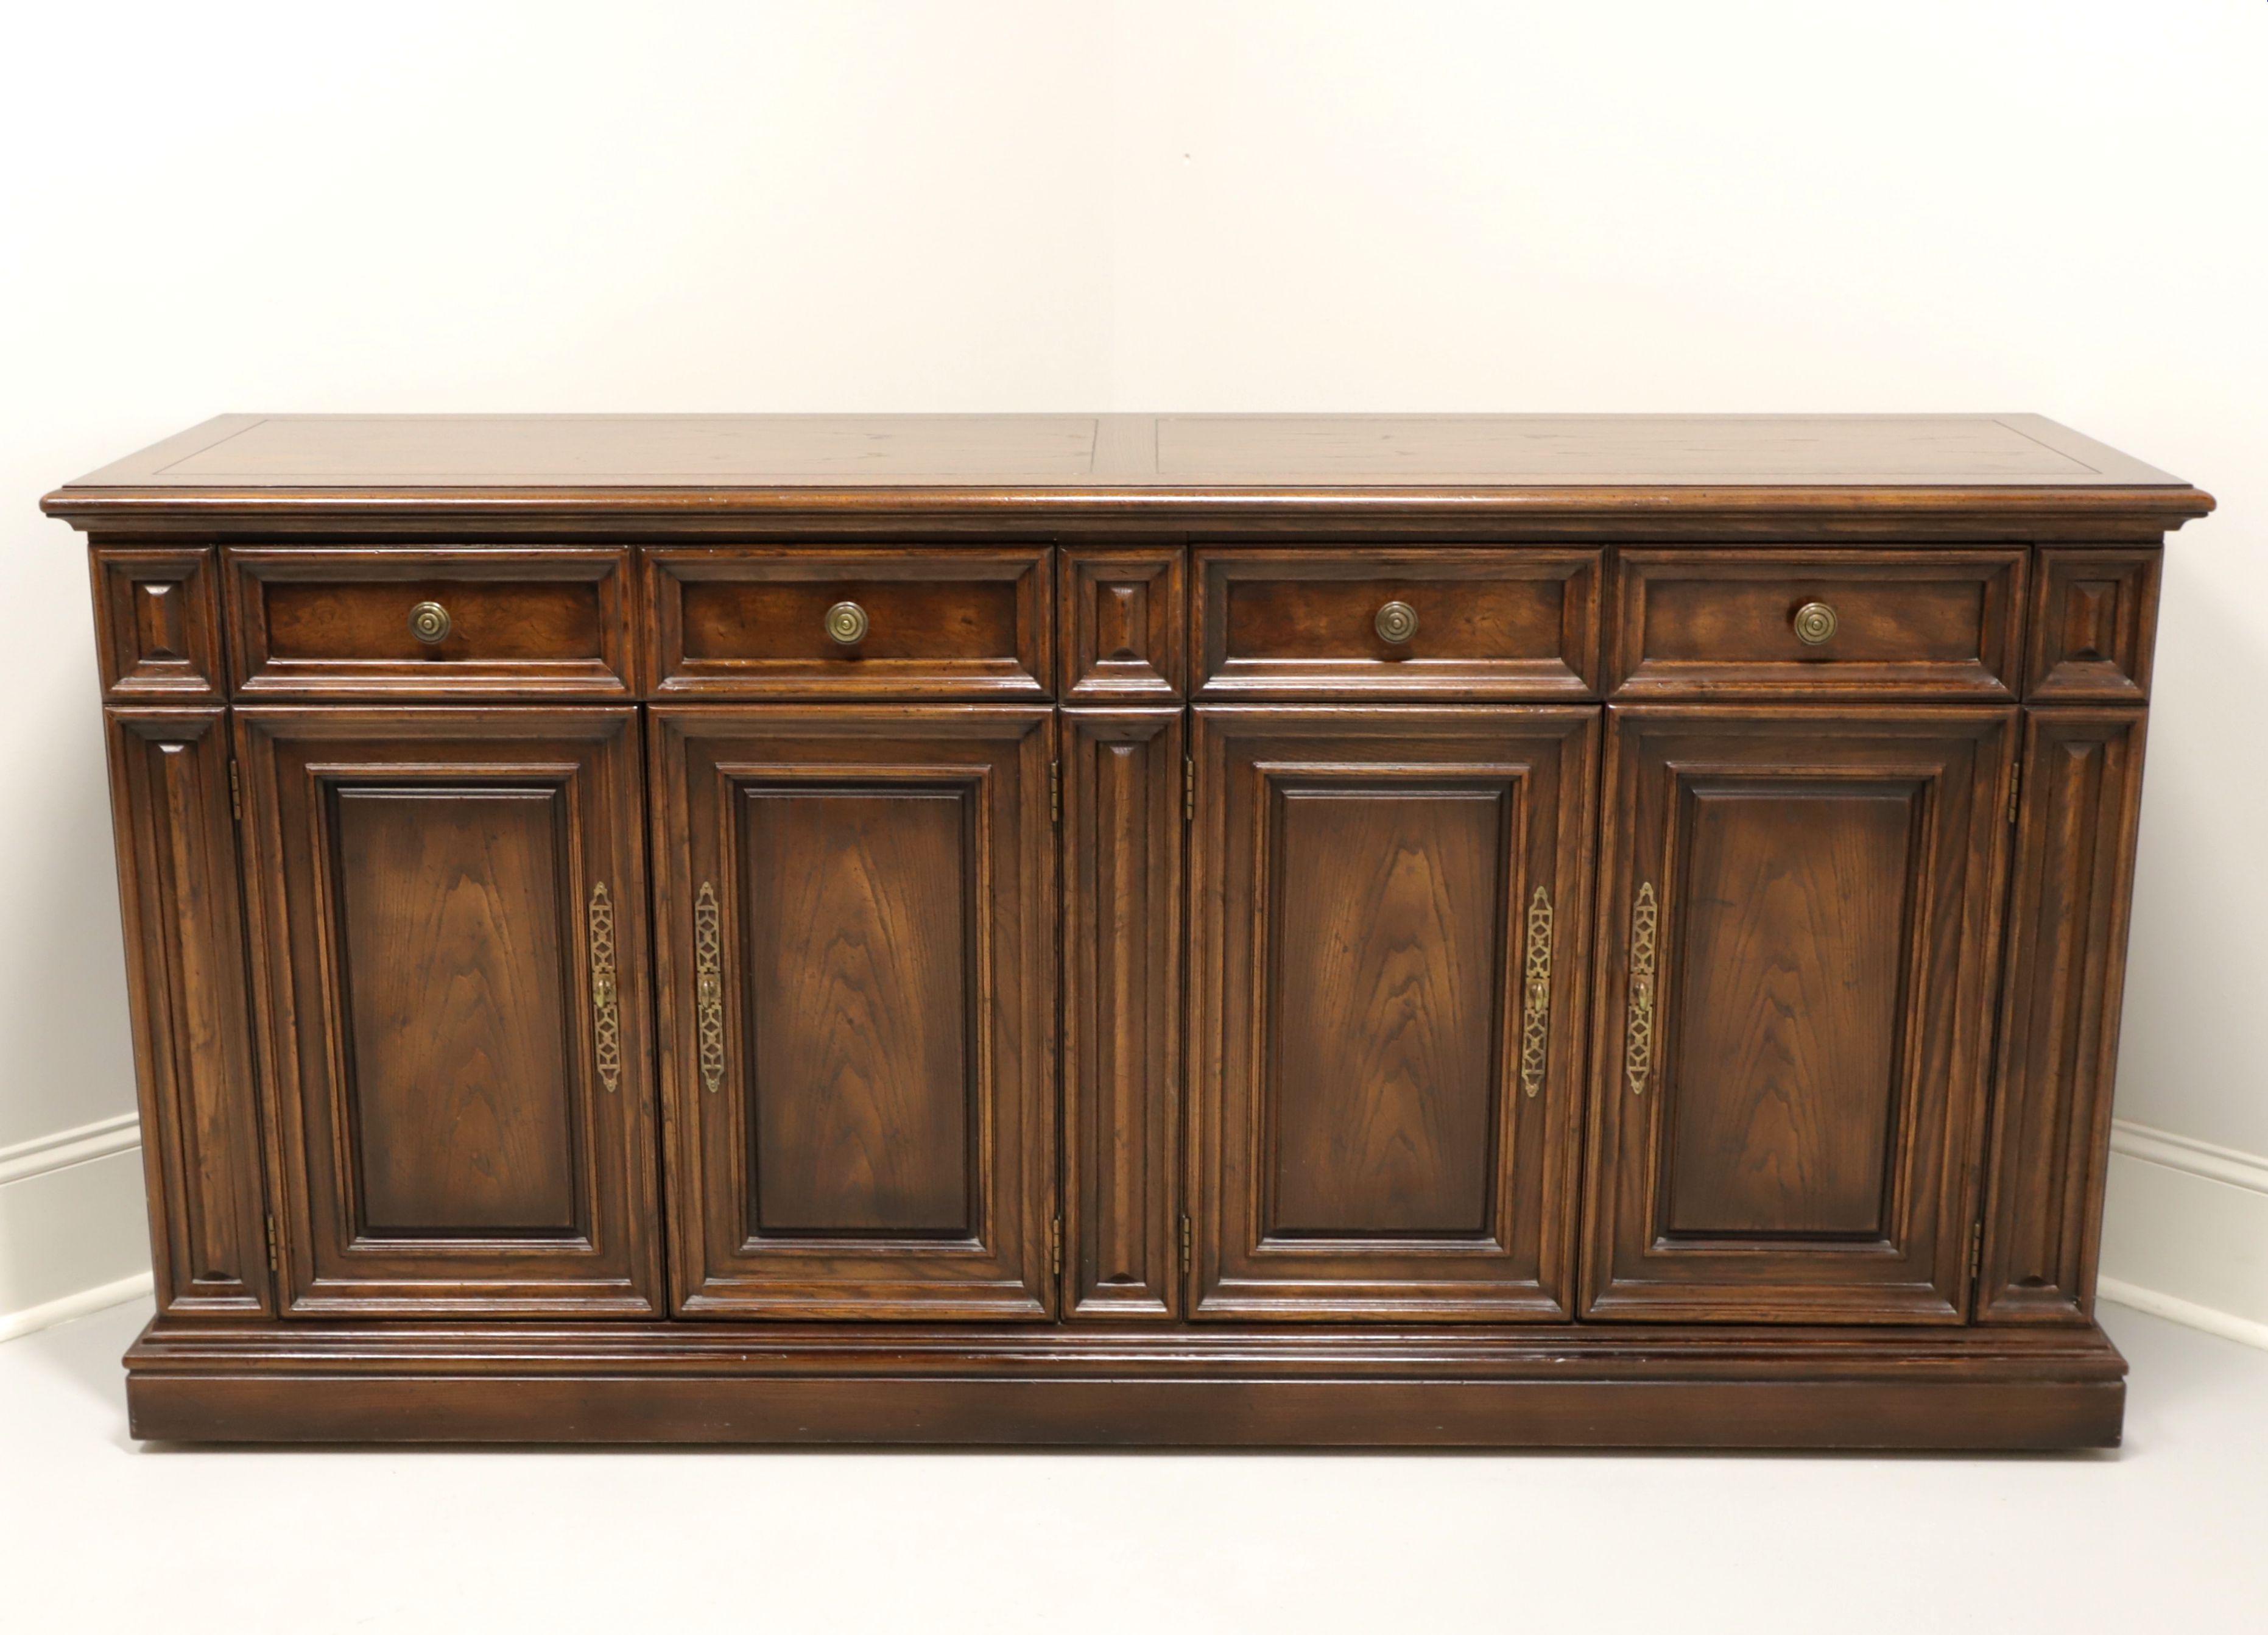 A Tudor style credenza by Henredon, from their Four Centuries Collection. Solid oak with banded top, brass hardware, raised panel doors, drawer fronts, center & sides and on wheels for easier movement. Features two drawers of dovetail construction